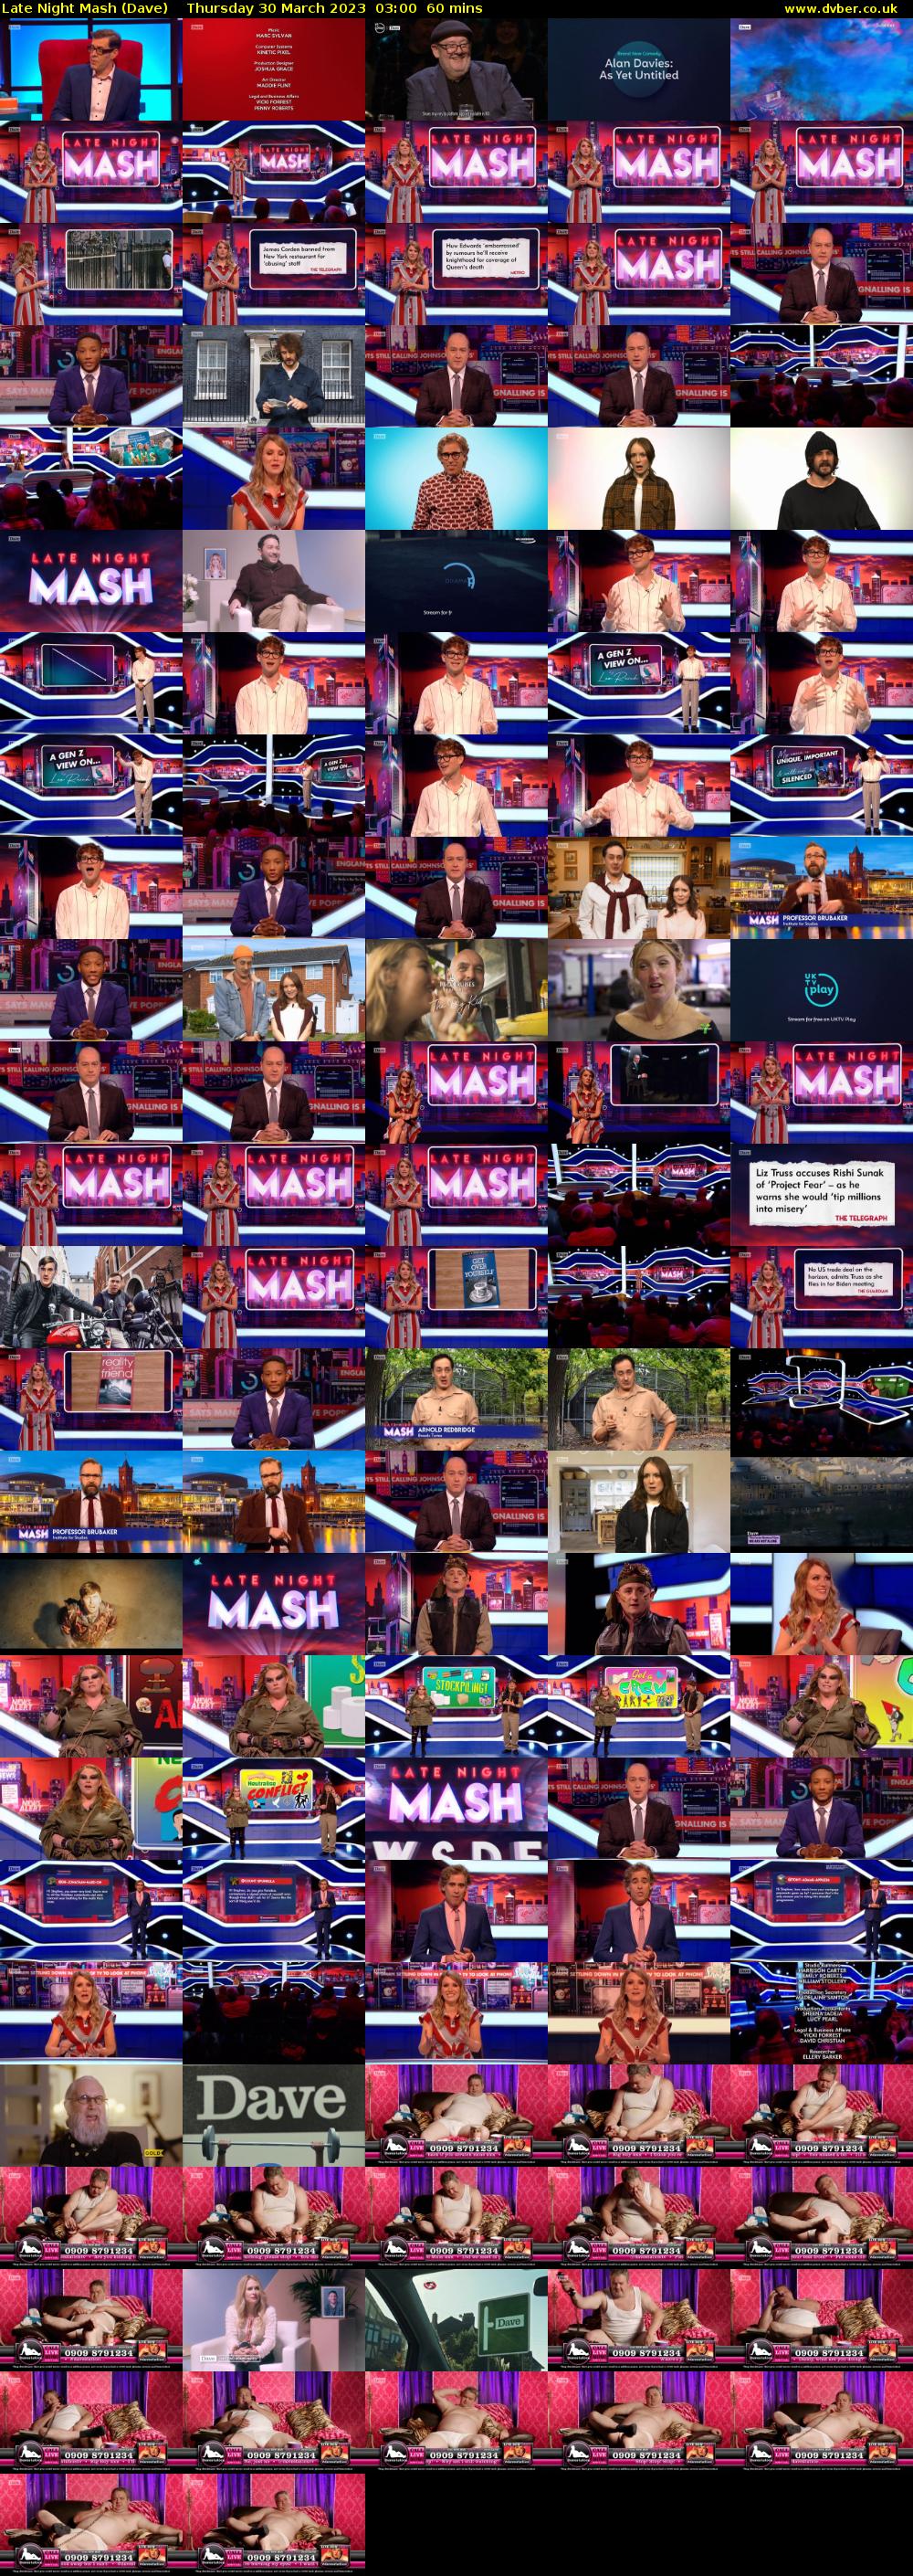 Late Night Mash (Dave) Thursday 30 March 2023 03:00 - 04:00